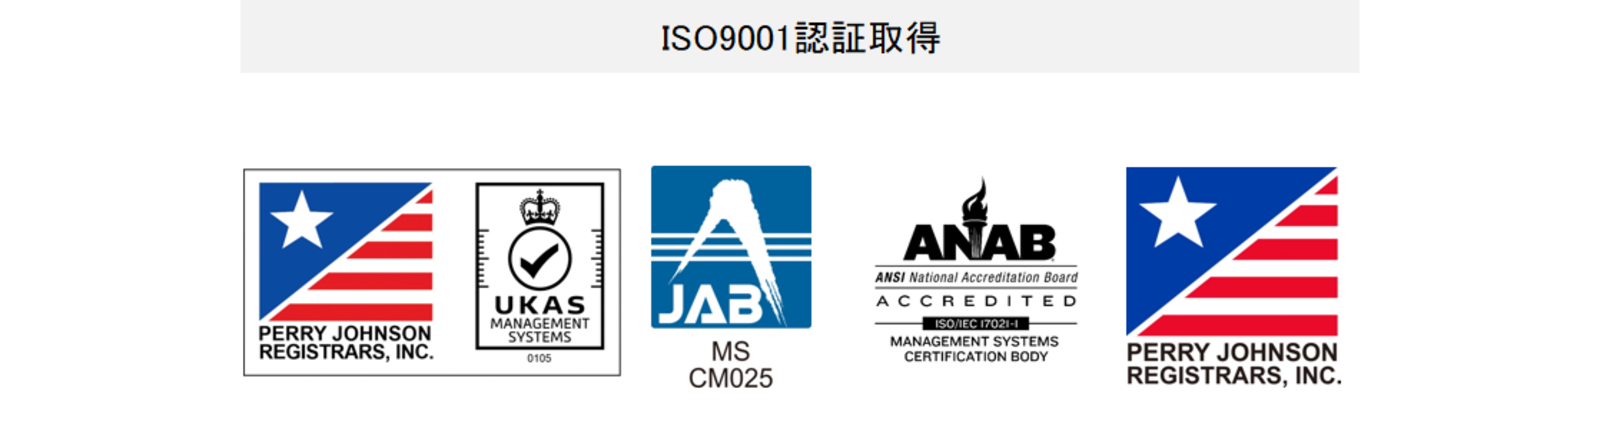 ISO9001認証取得 Perry Johnson Registrars-Quality Assurance UKAS management systems JAB MS CM025 The ANSI National Accreditation Board